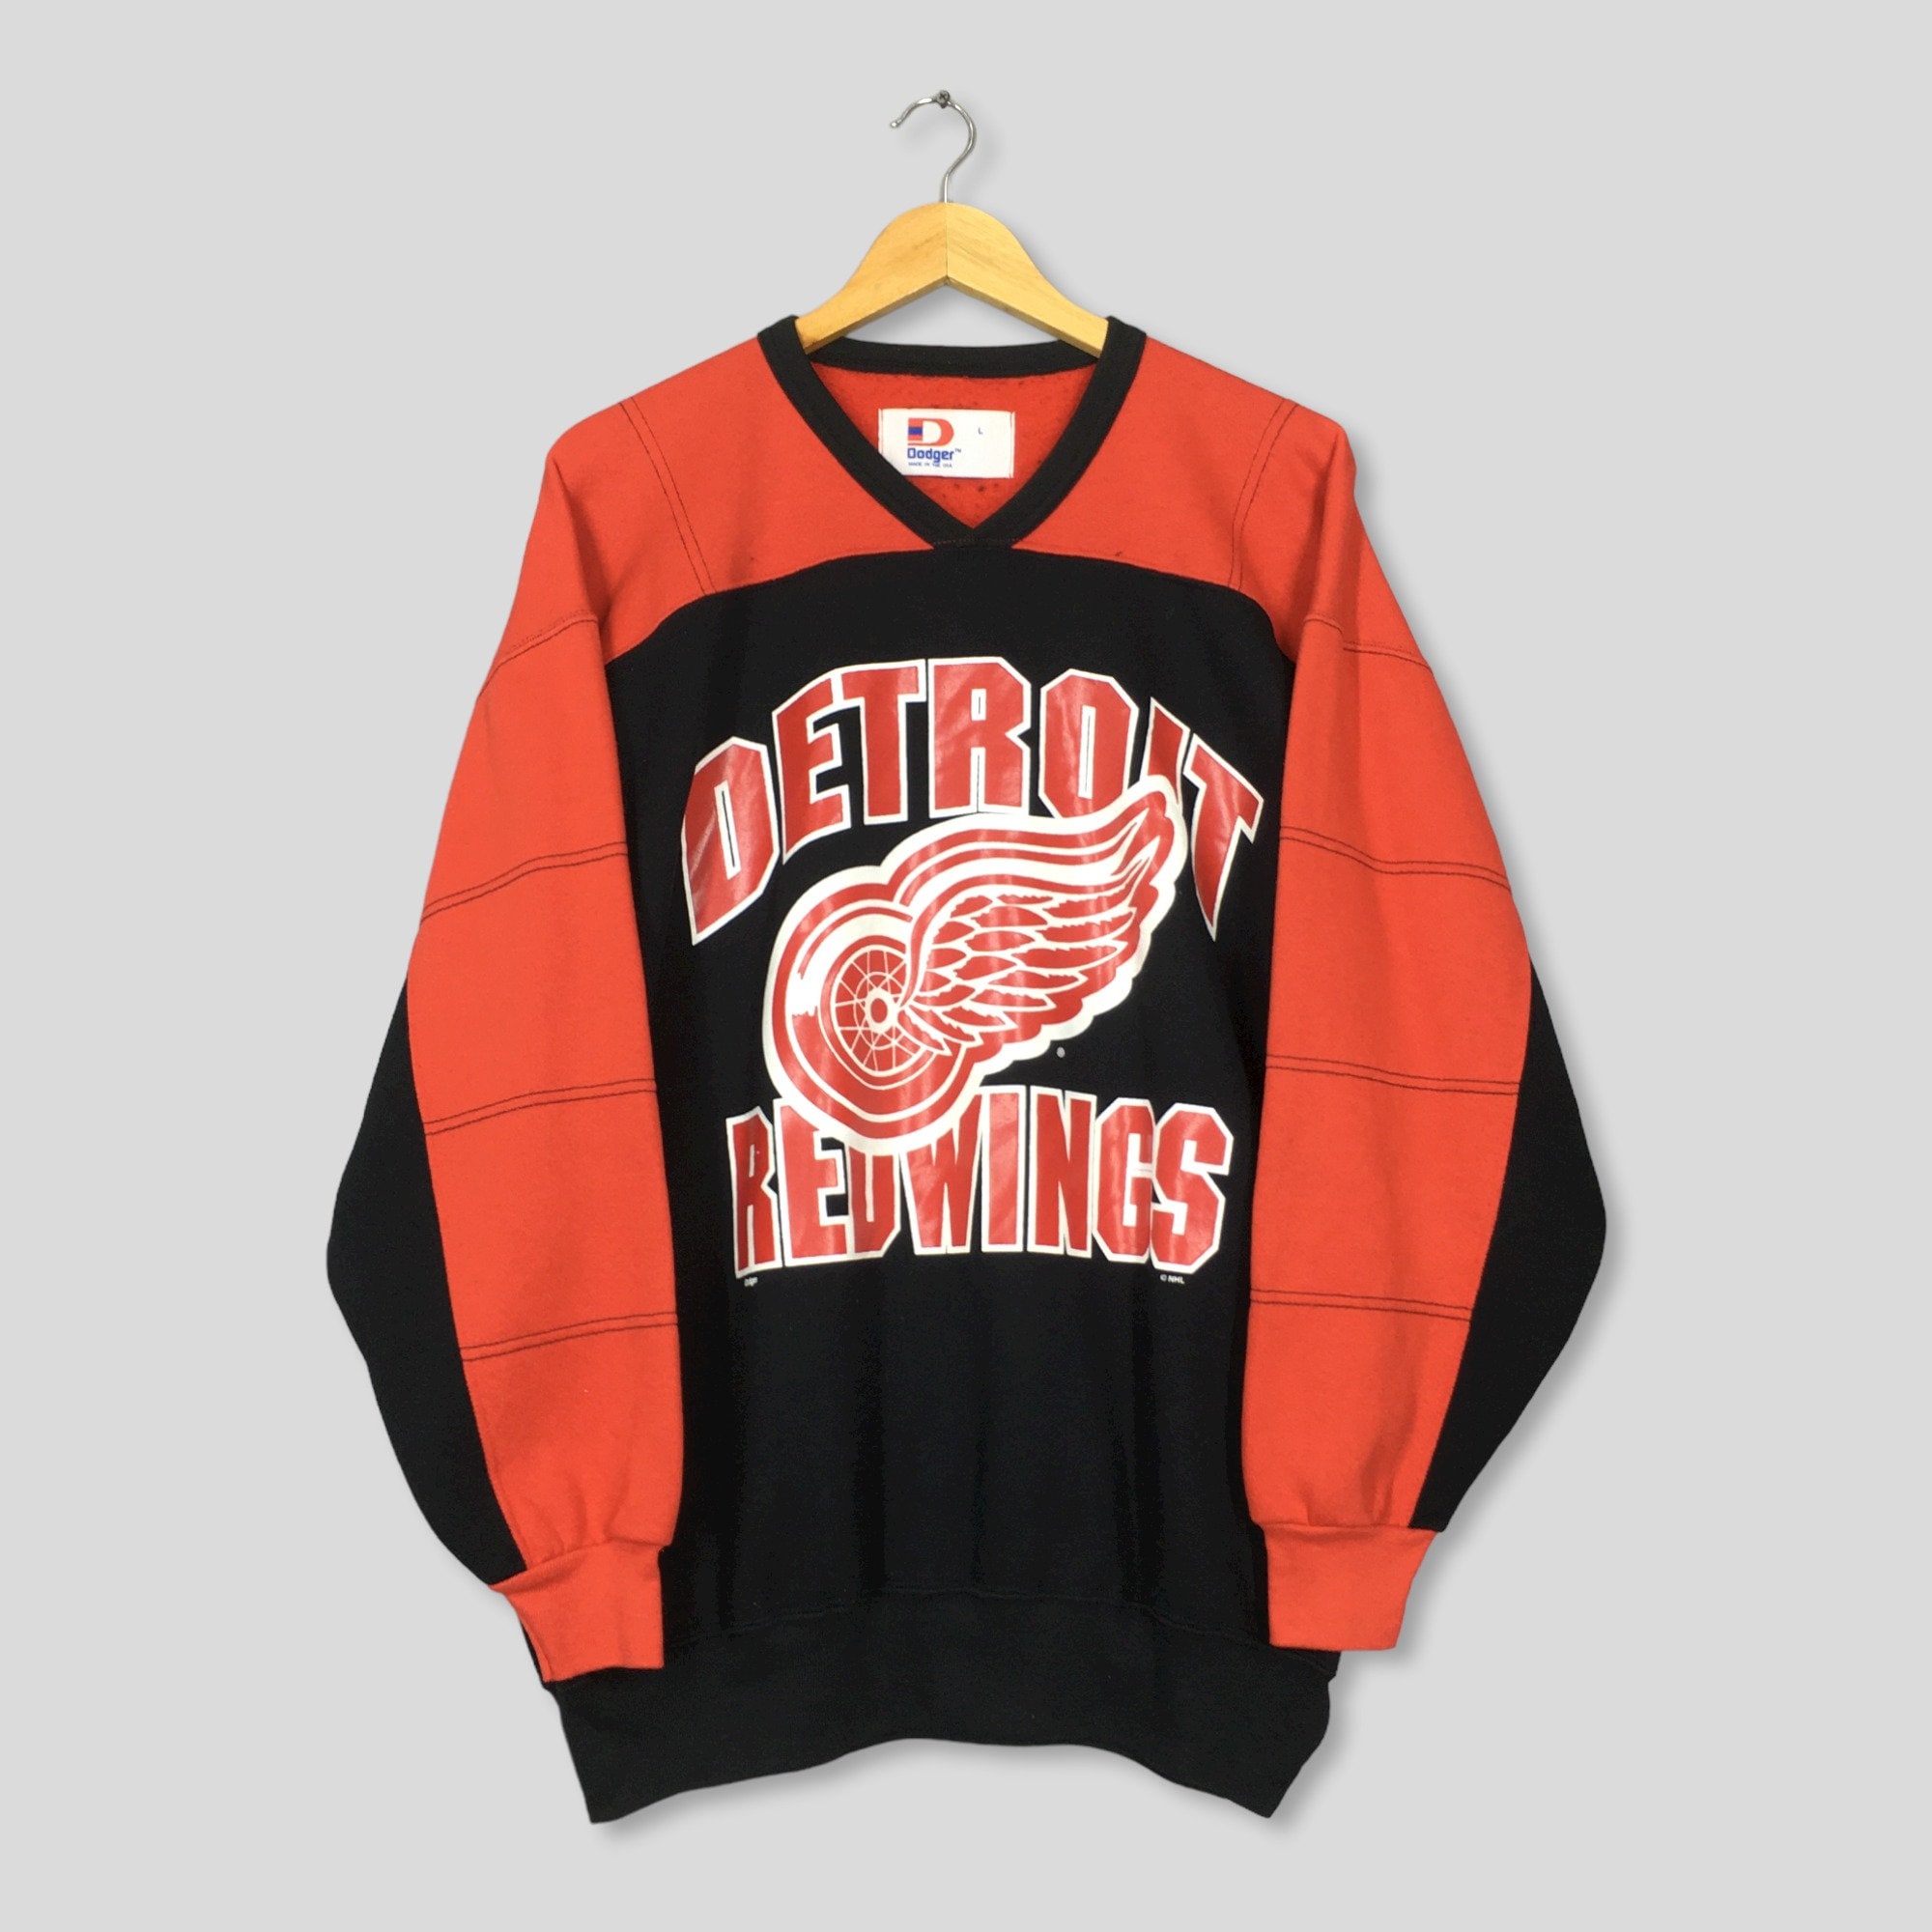 Nhl Detroit Red Wings Tree Christmas Ugly Christmas Sweaters